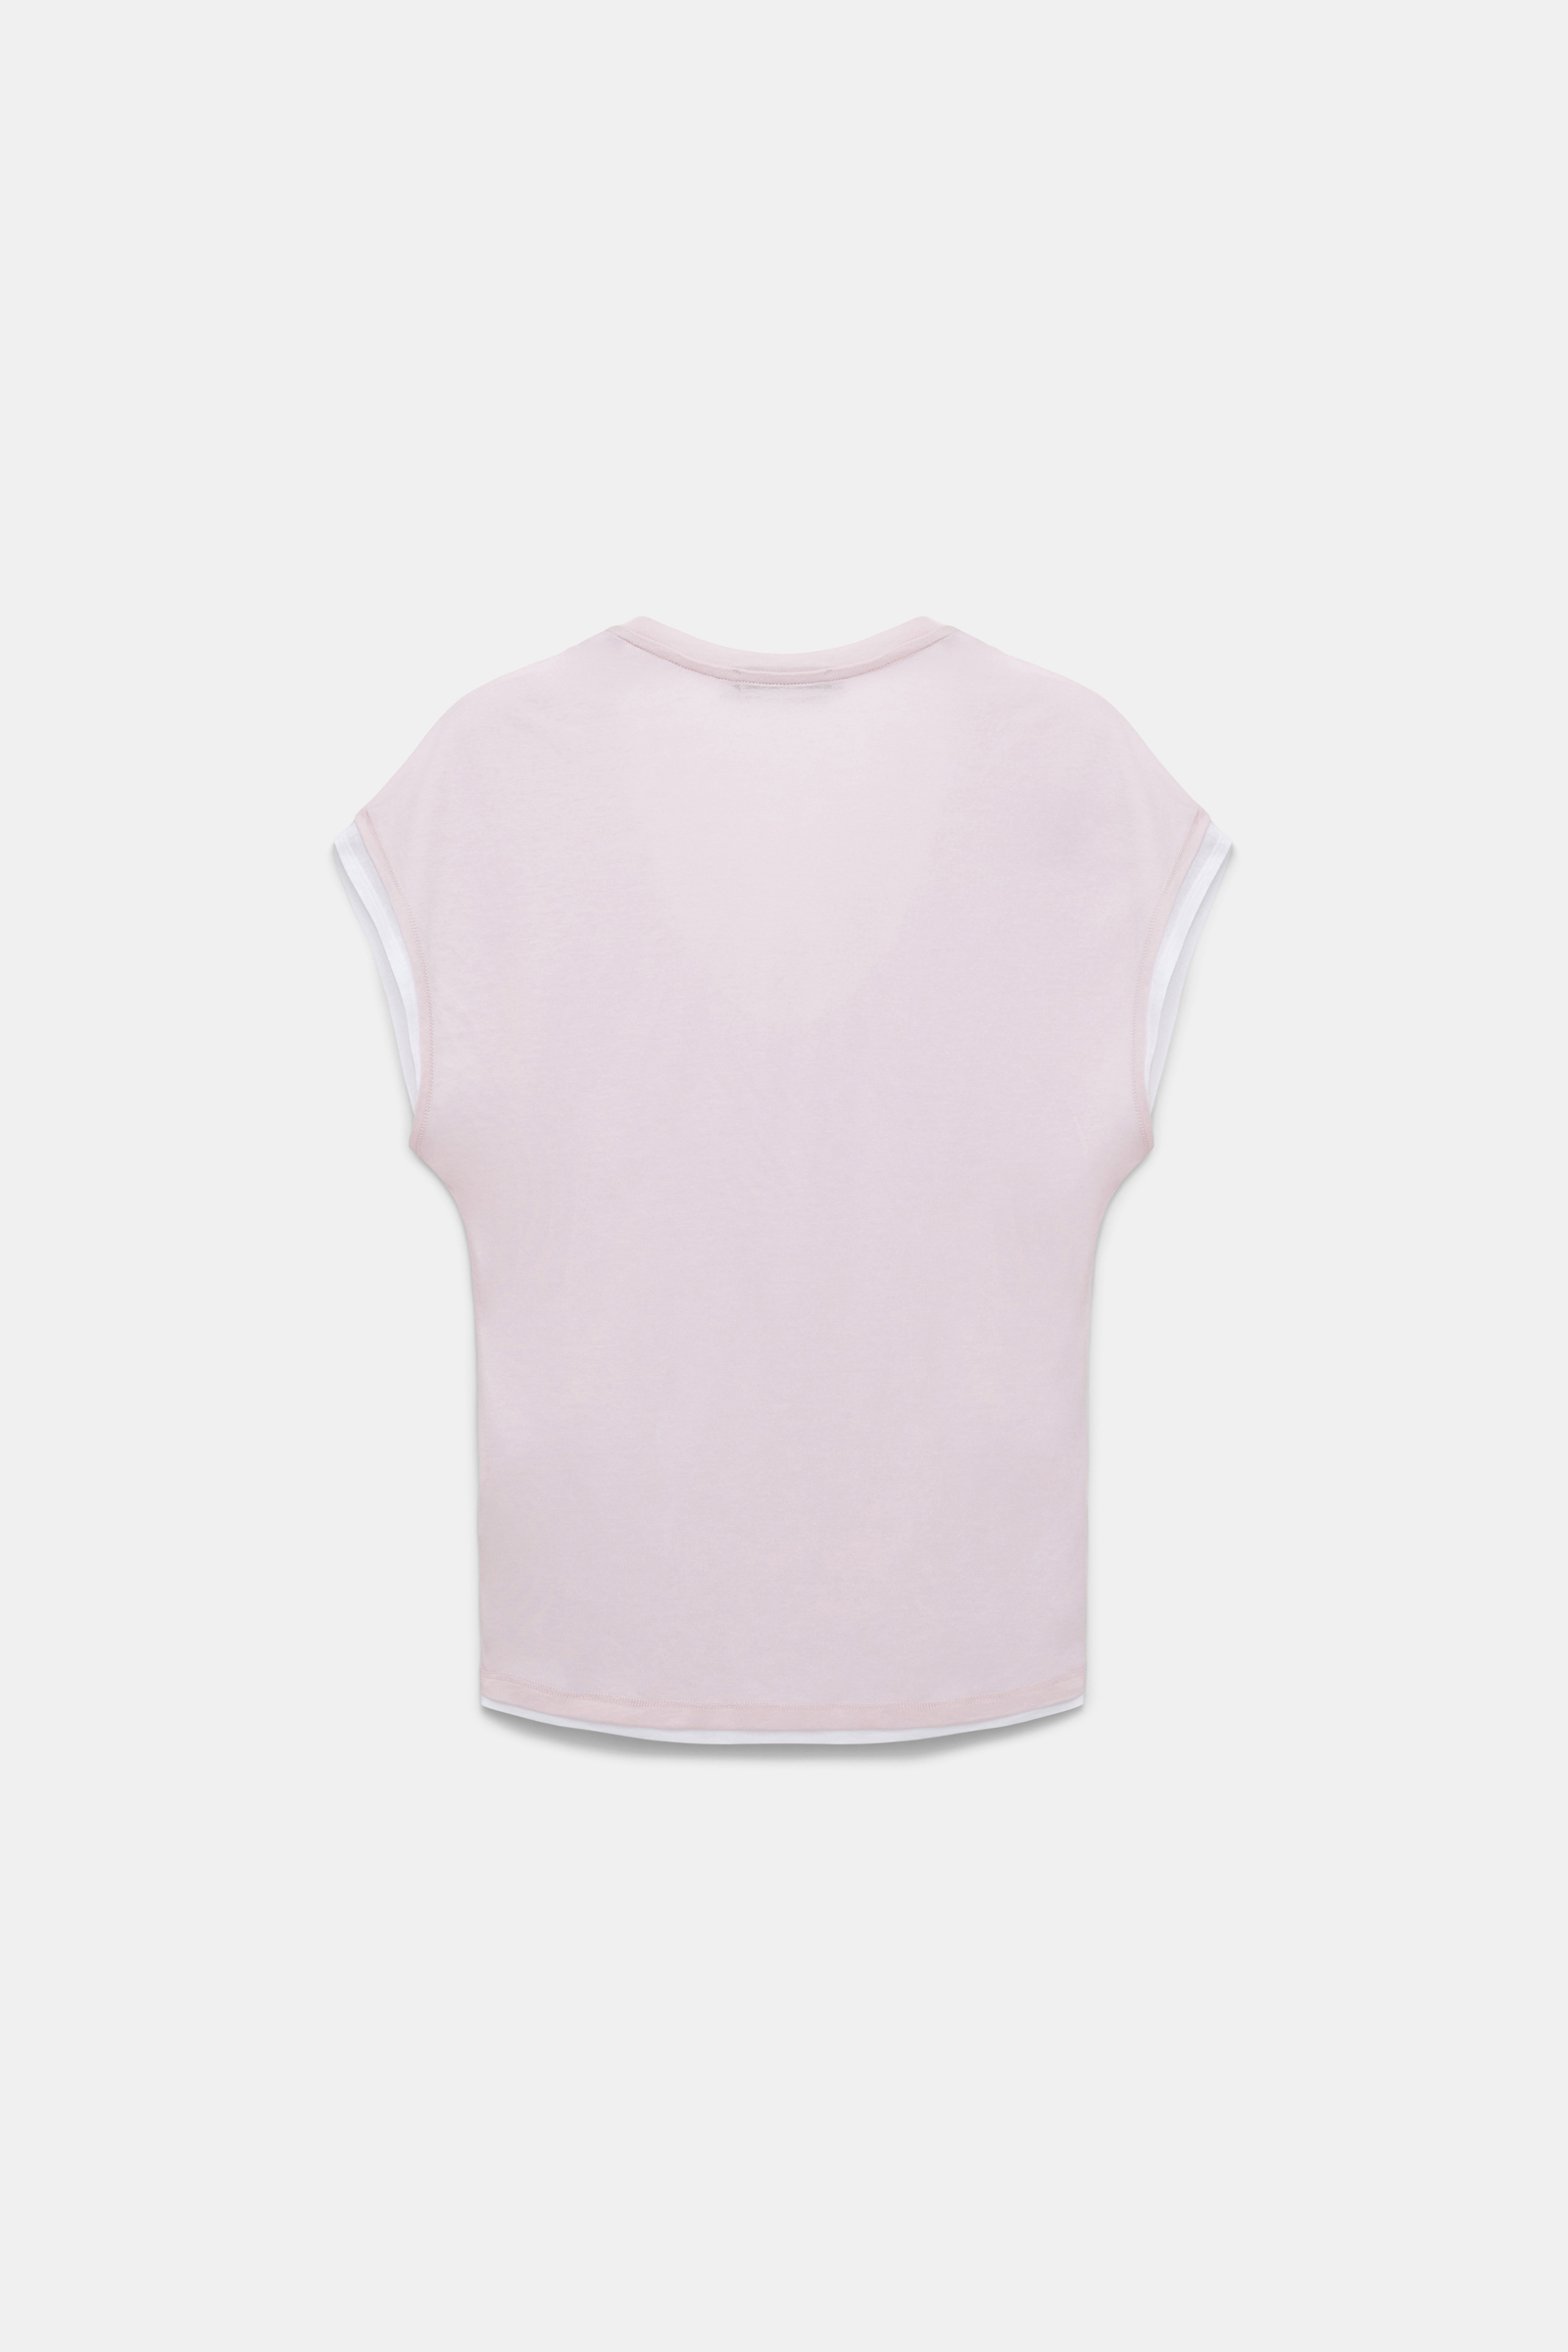 Dorothee Schumacher T-Shirt im Layer-Look white and rose mix